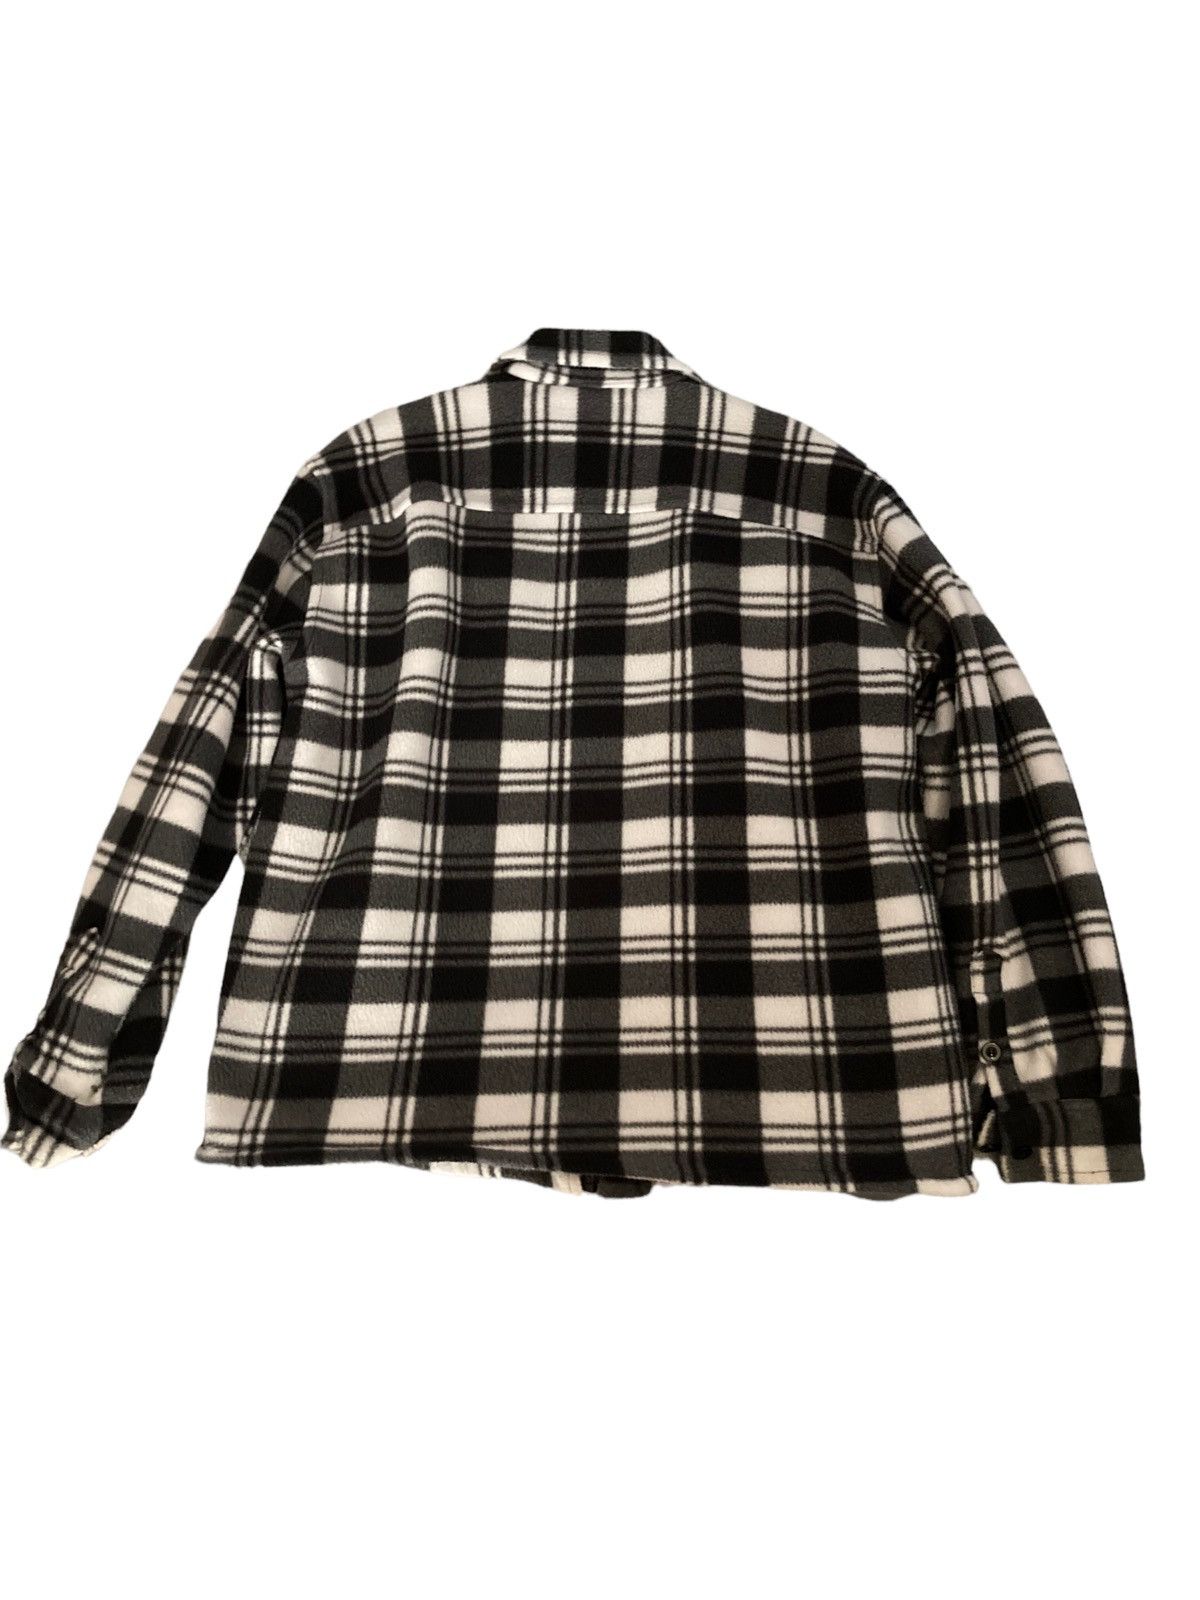 Hanover Hanover Flannel Size US L / EU 52-54 / 3 - 2 Preview